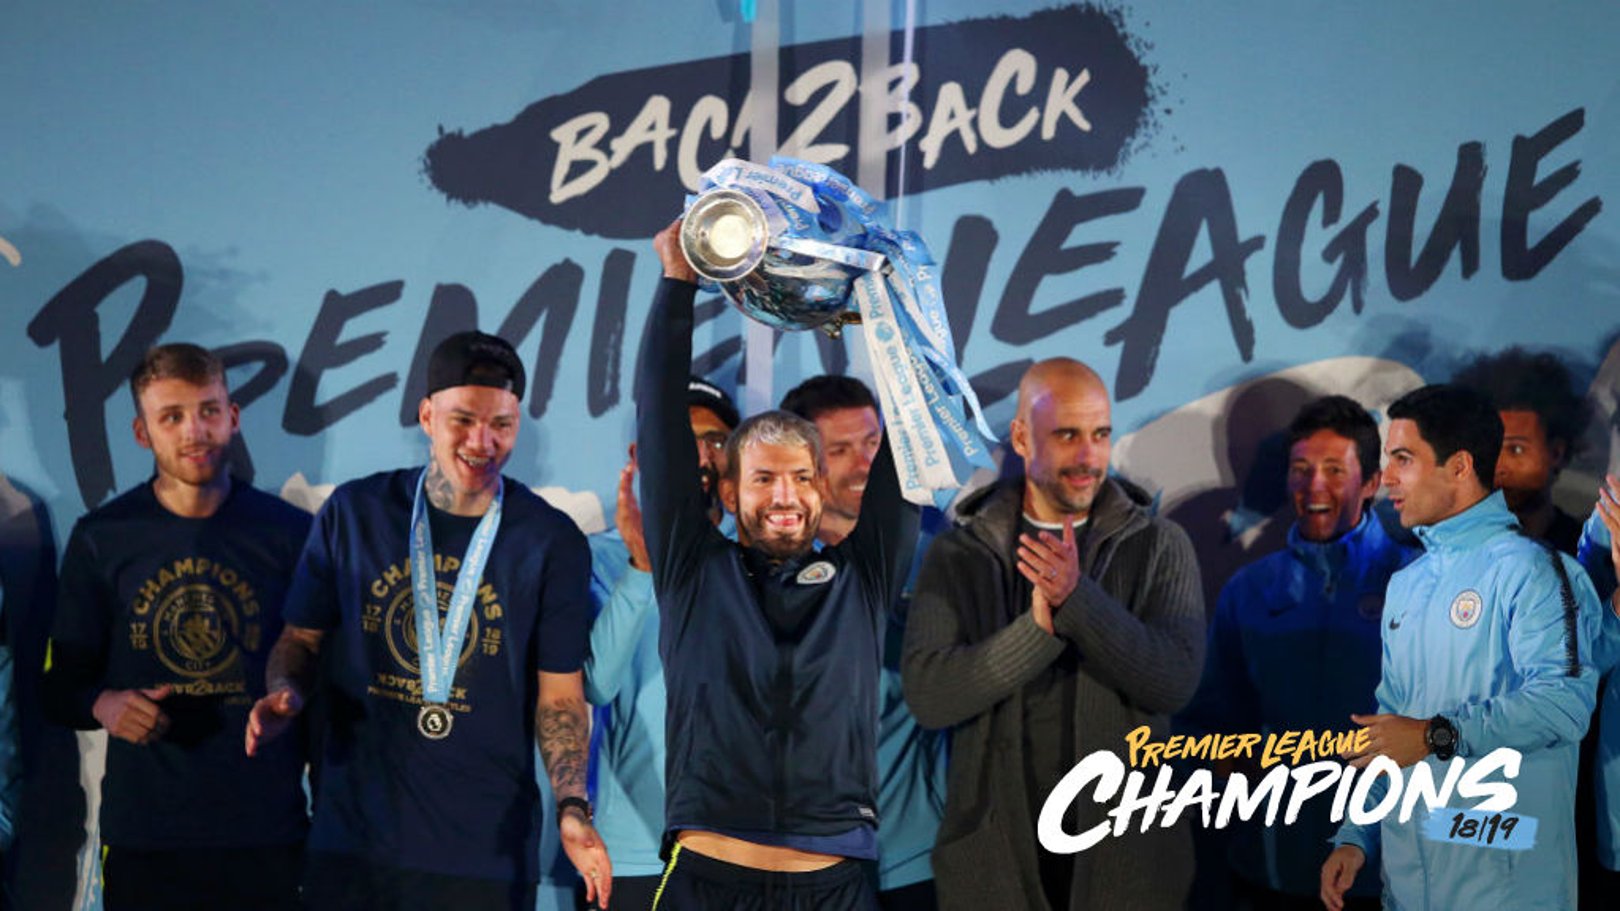 CHAMPIONS: City's dominance in this season's Premier League underlined by stats